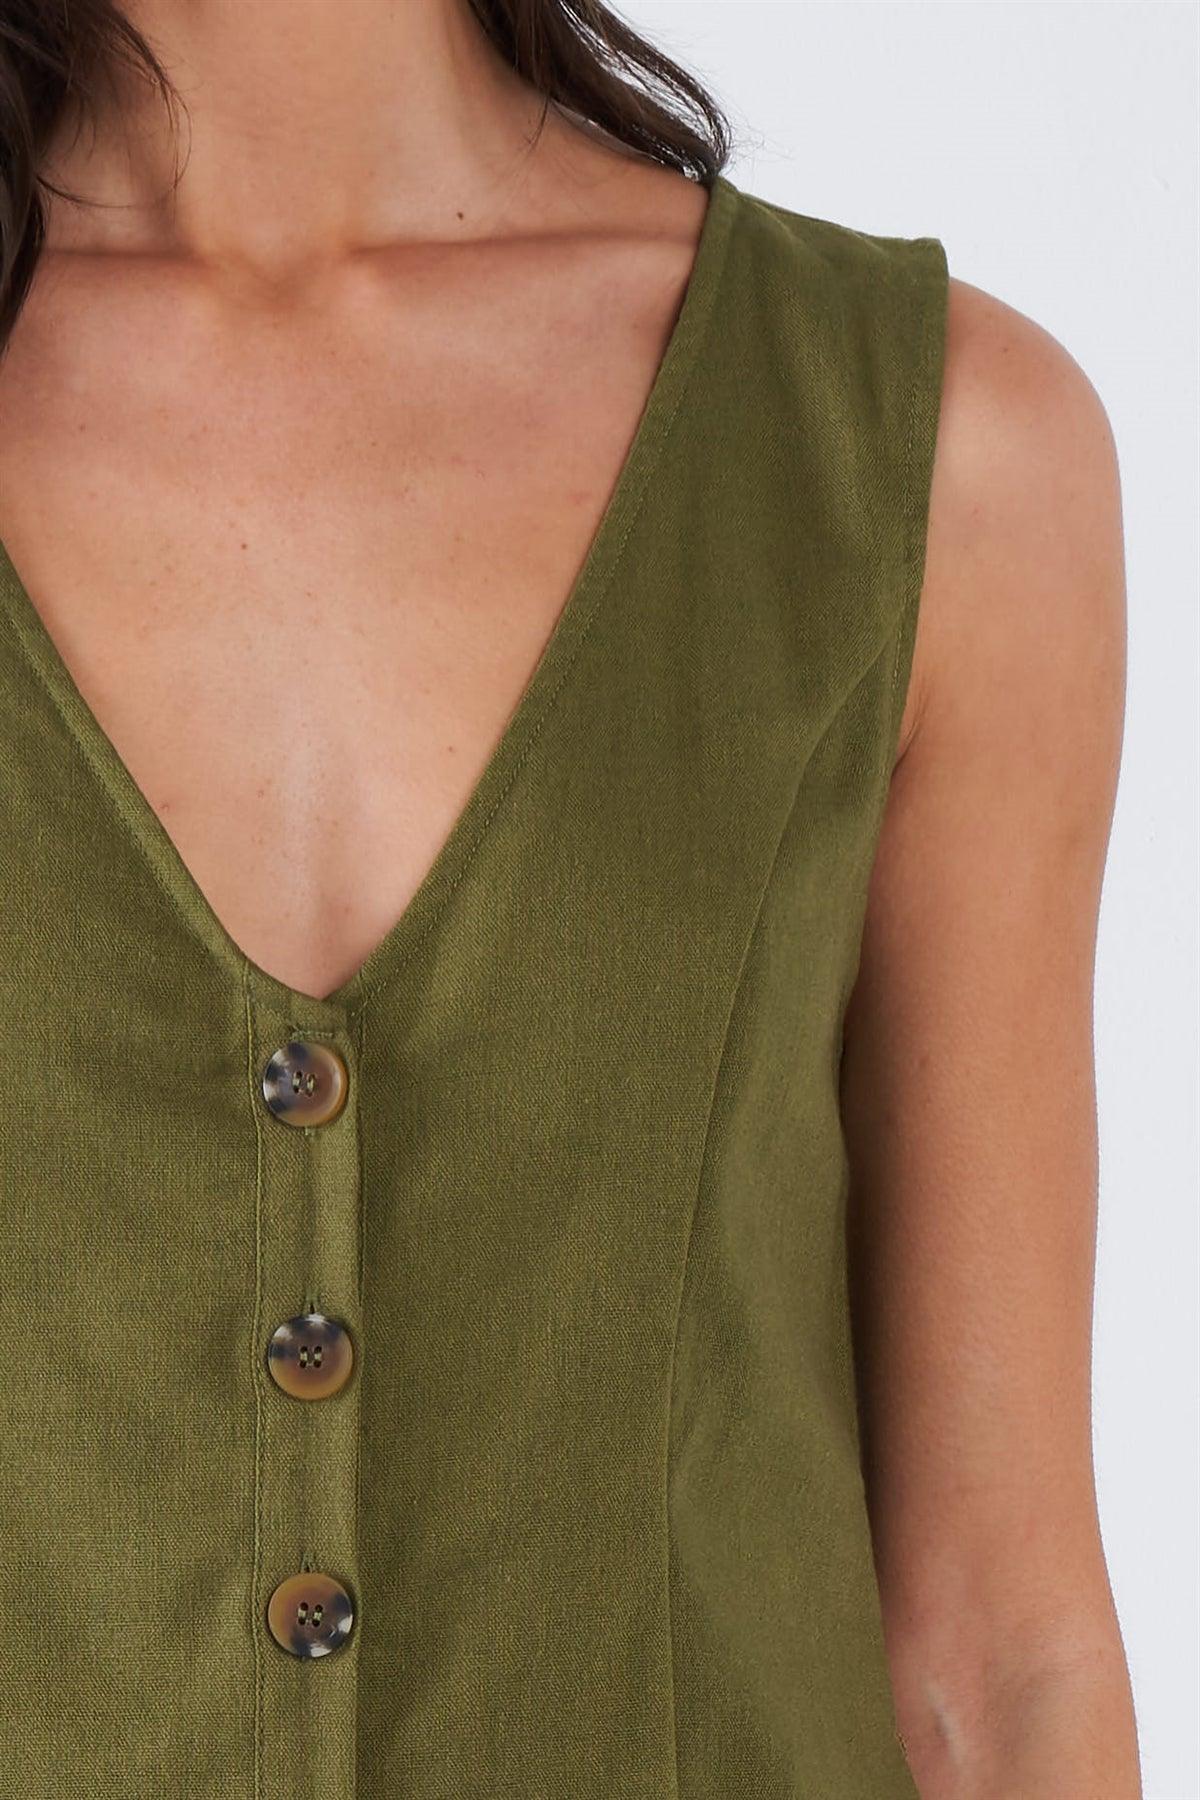 Moss Green Solid Chic V-Neck Front Button Mini Short Romper /3-2-1